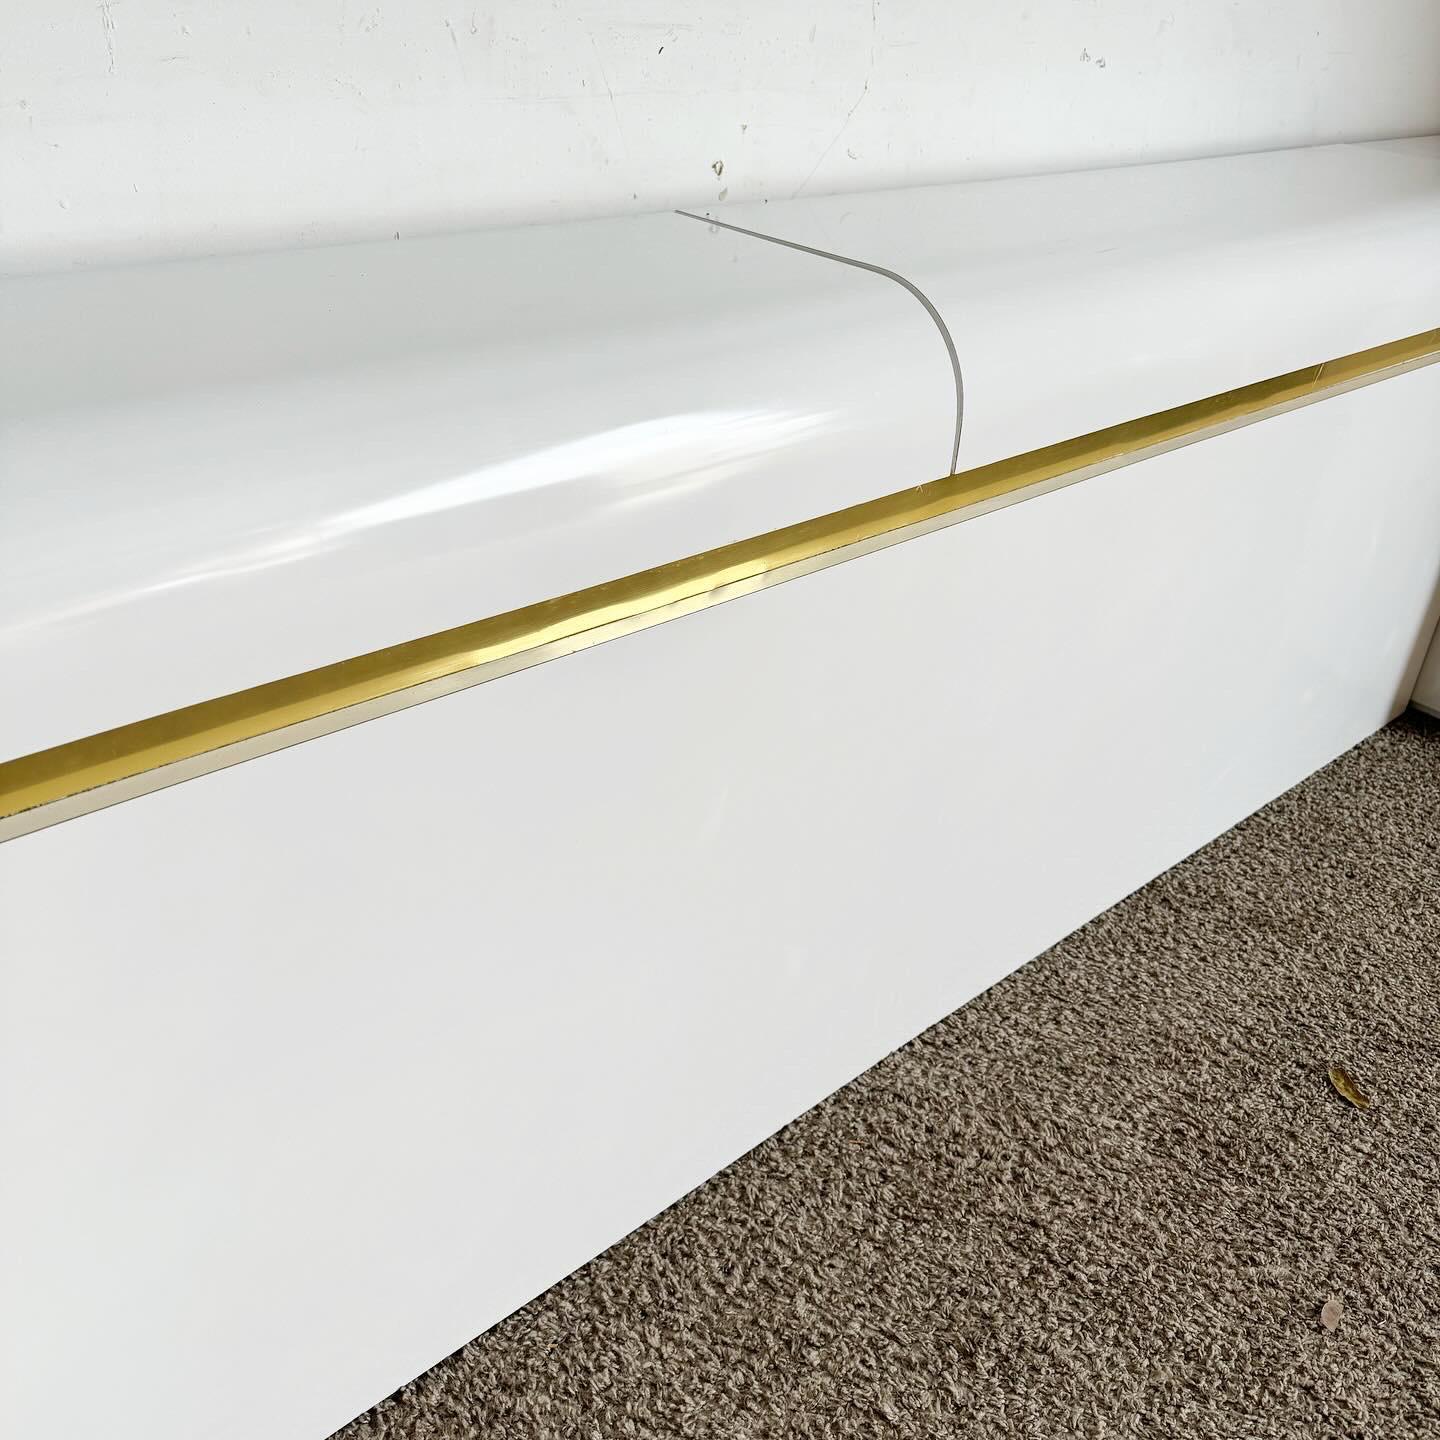 20th Century Postmodern White Lacquer Laminate King Storage Waterfall Headboard & Nightstands For Sale